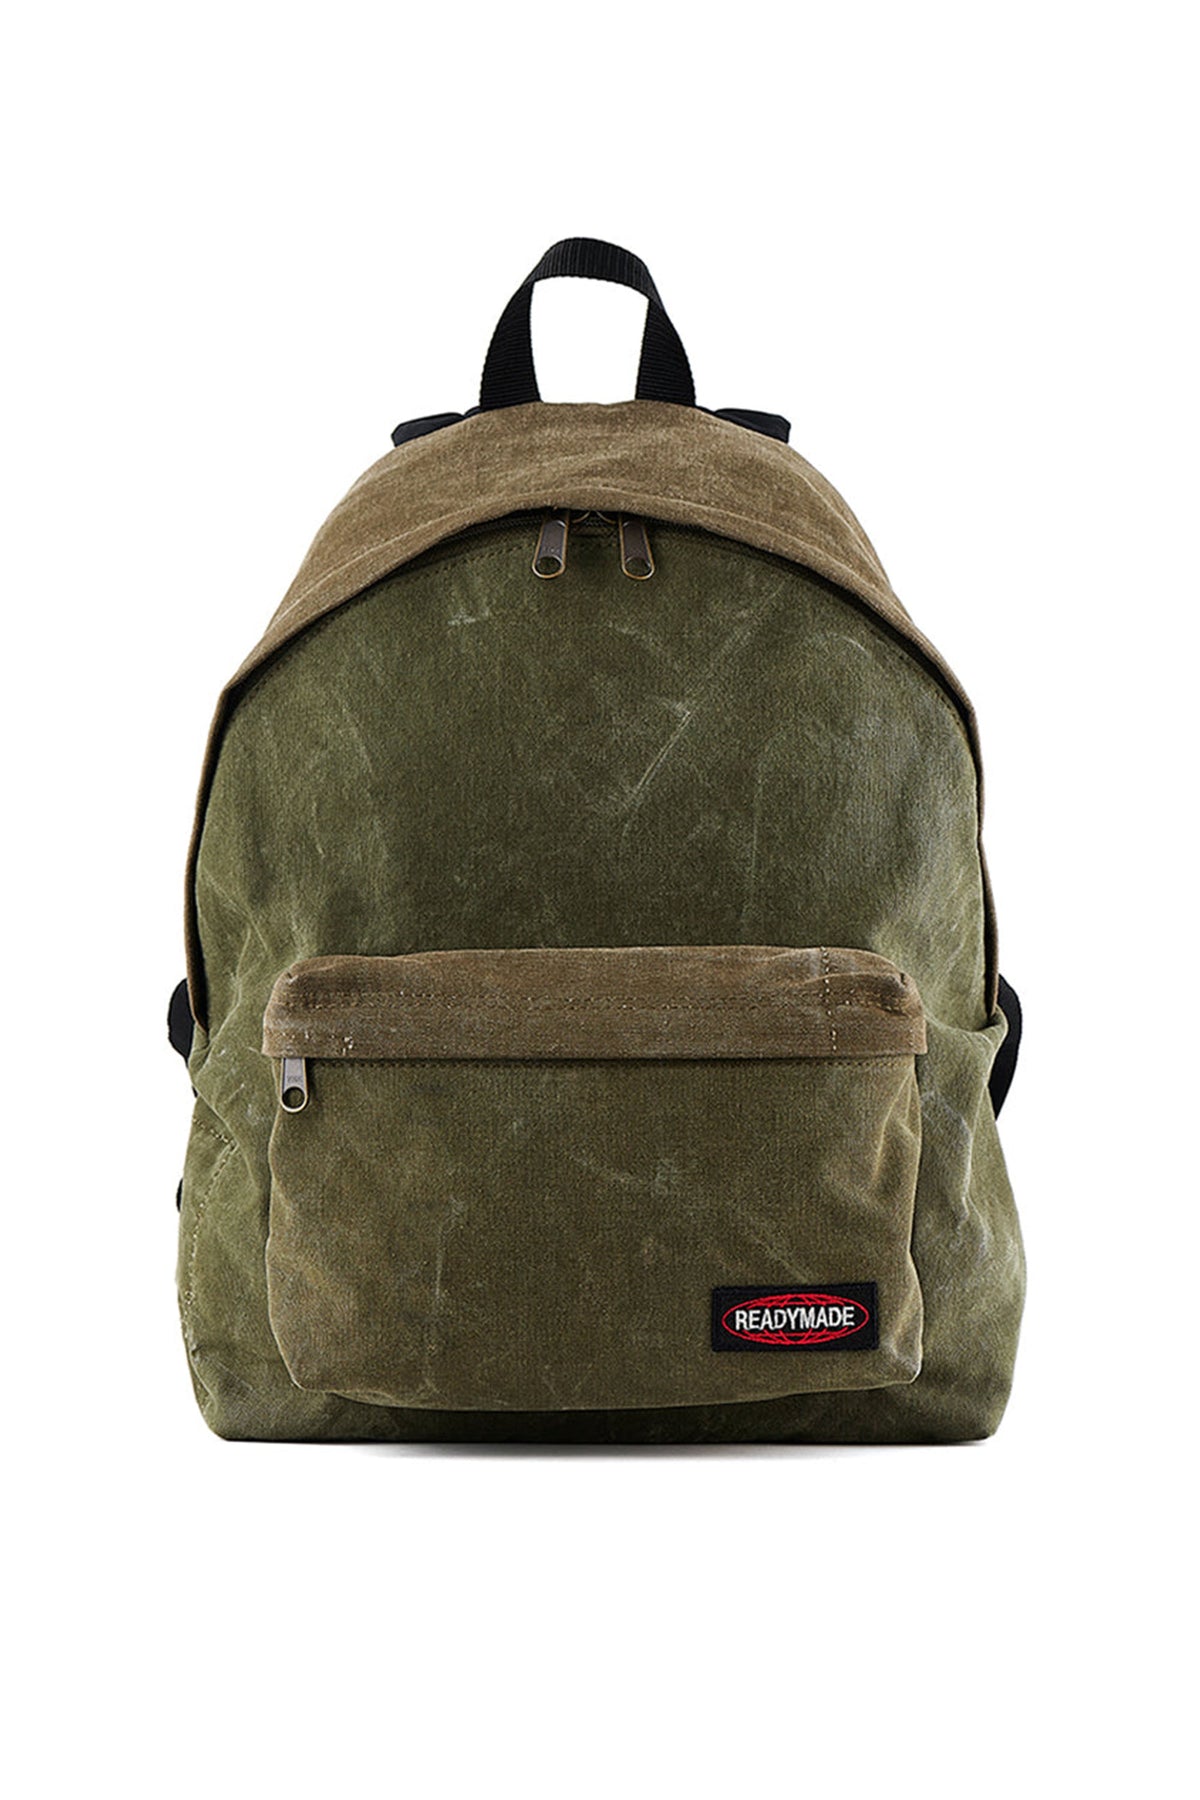 READYMADE BACK PACK / GRN